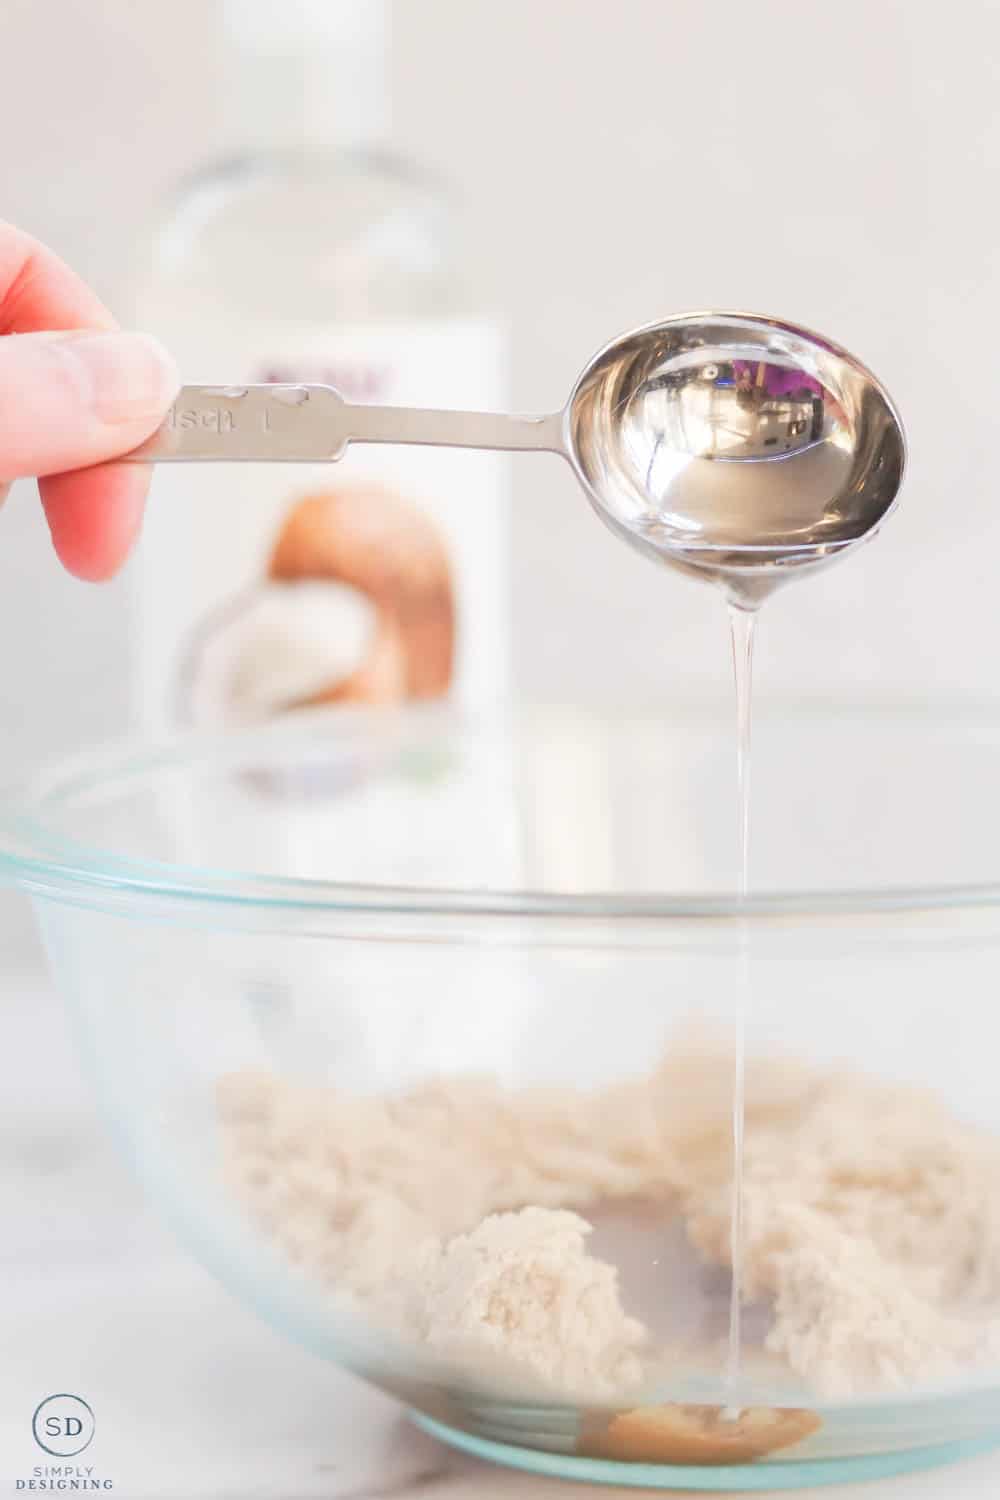 use measusing spoon to pour fractionated coconut oil into brown sugar